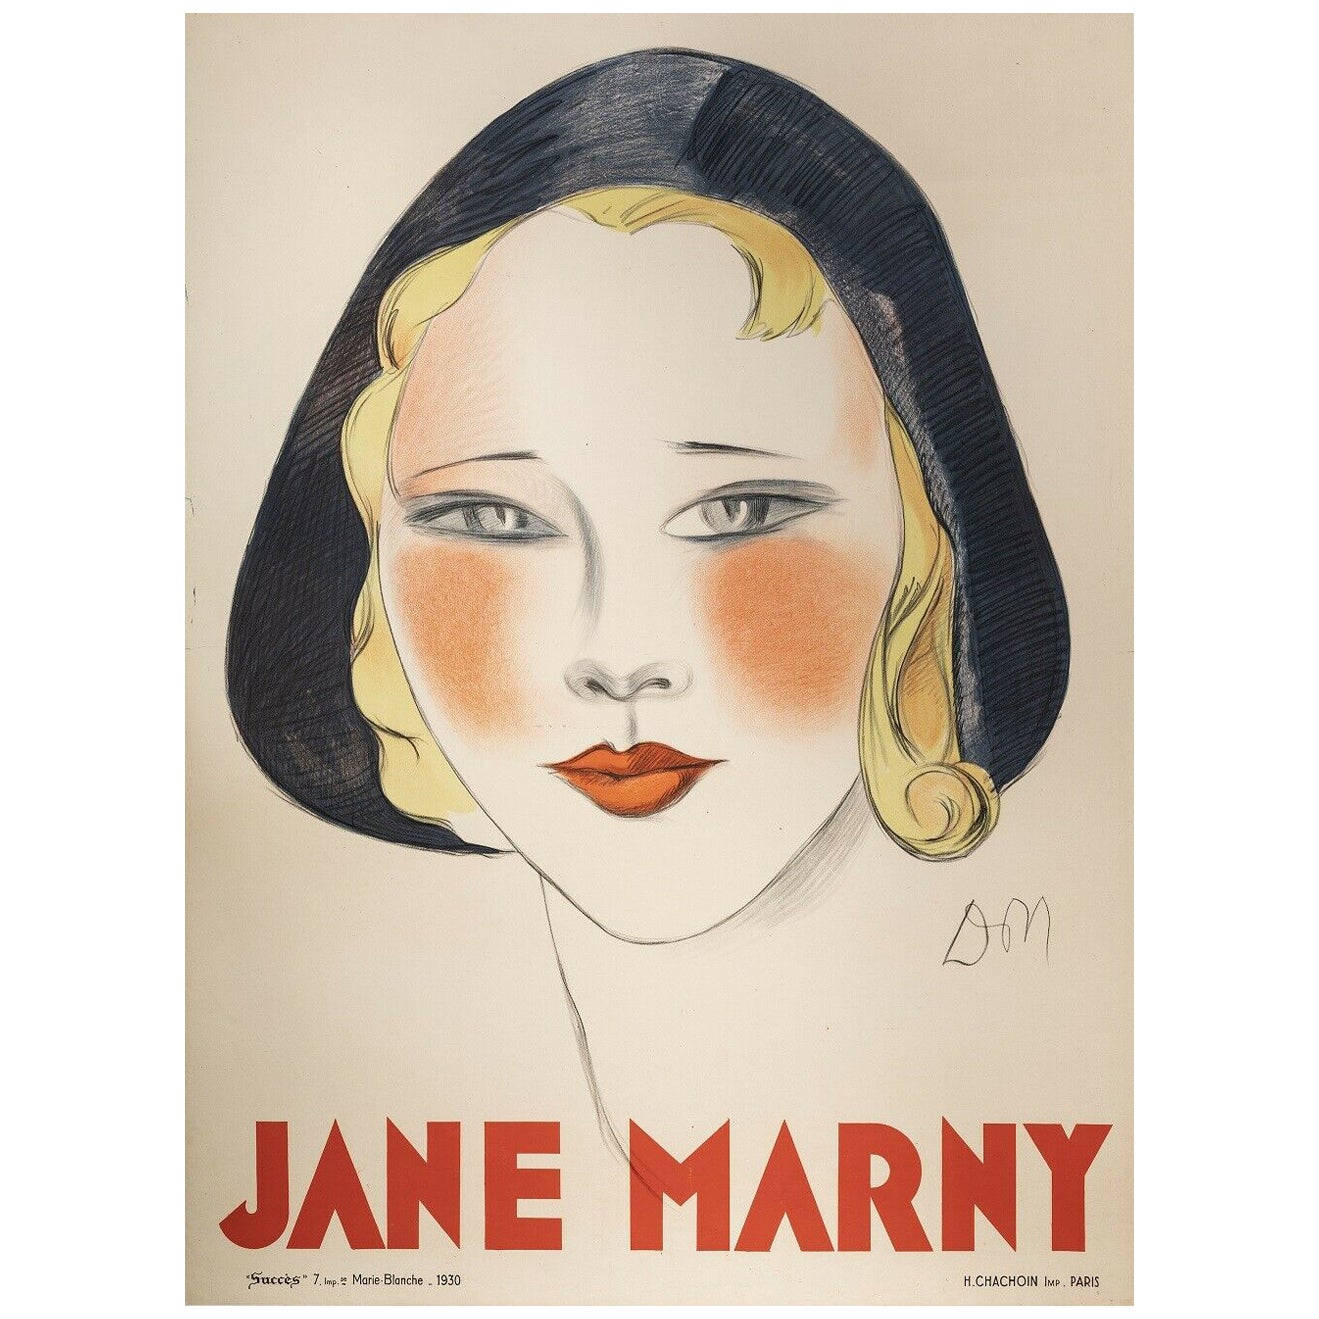 Original Art Deco Poster-Jean Don-Jane Marny-Actress -France, 1930 For Sale